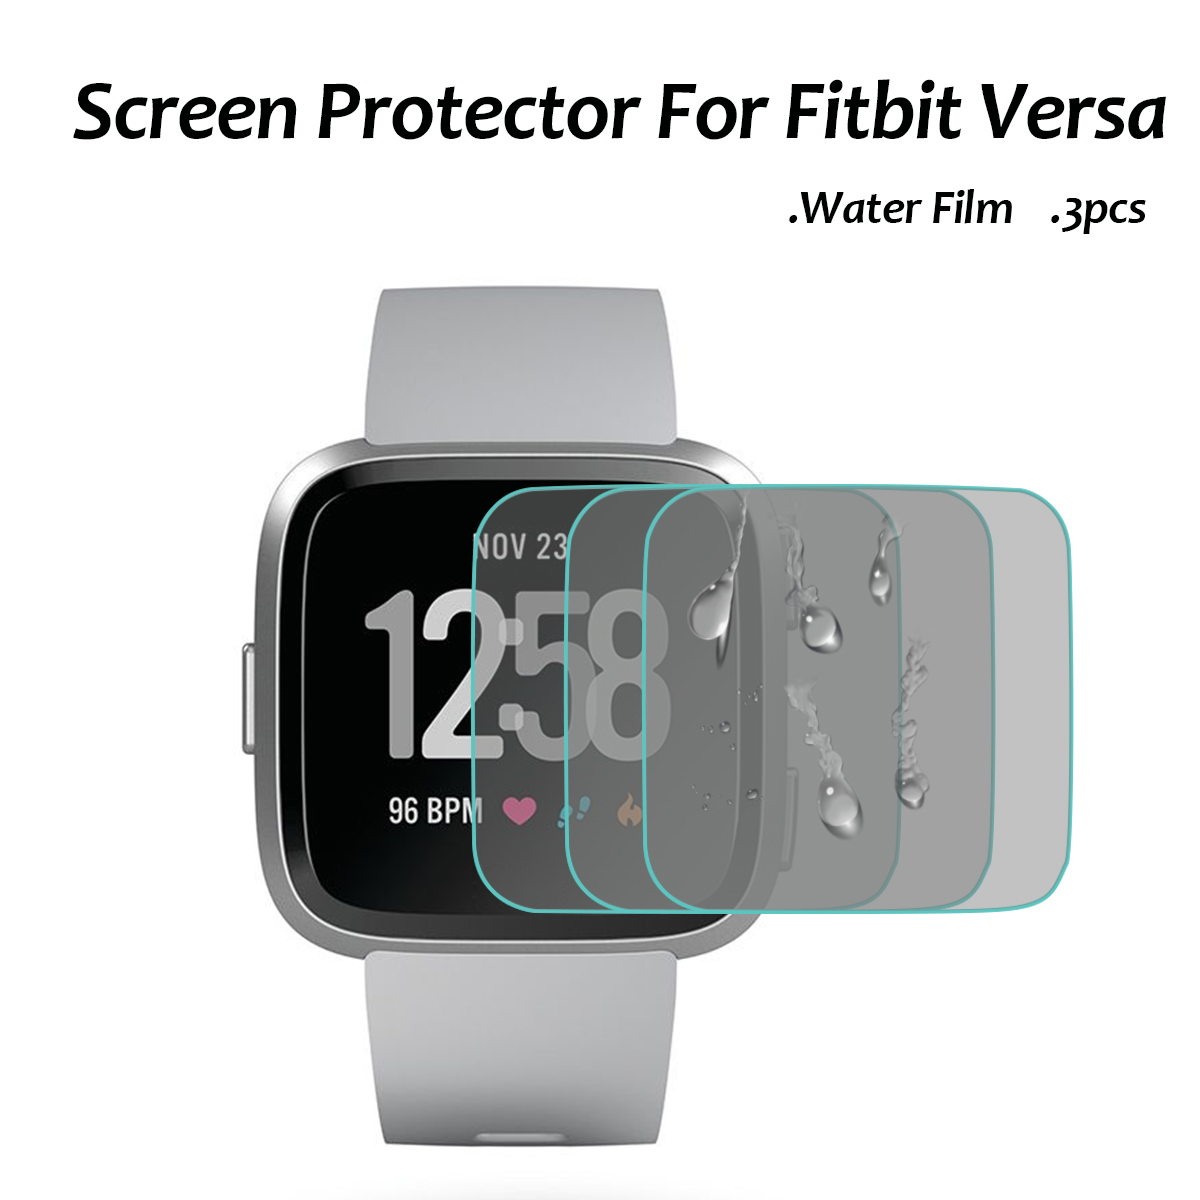 3PCS-Water-Film-Screen-Protector-for-Fitbit-Versa-1292345